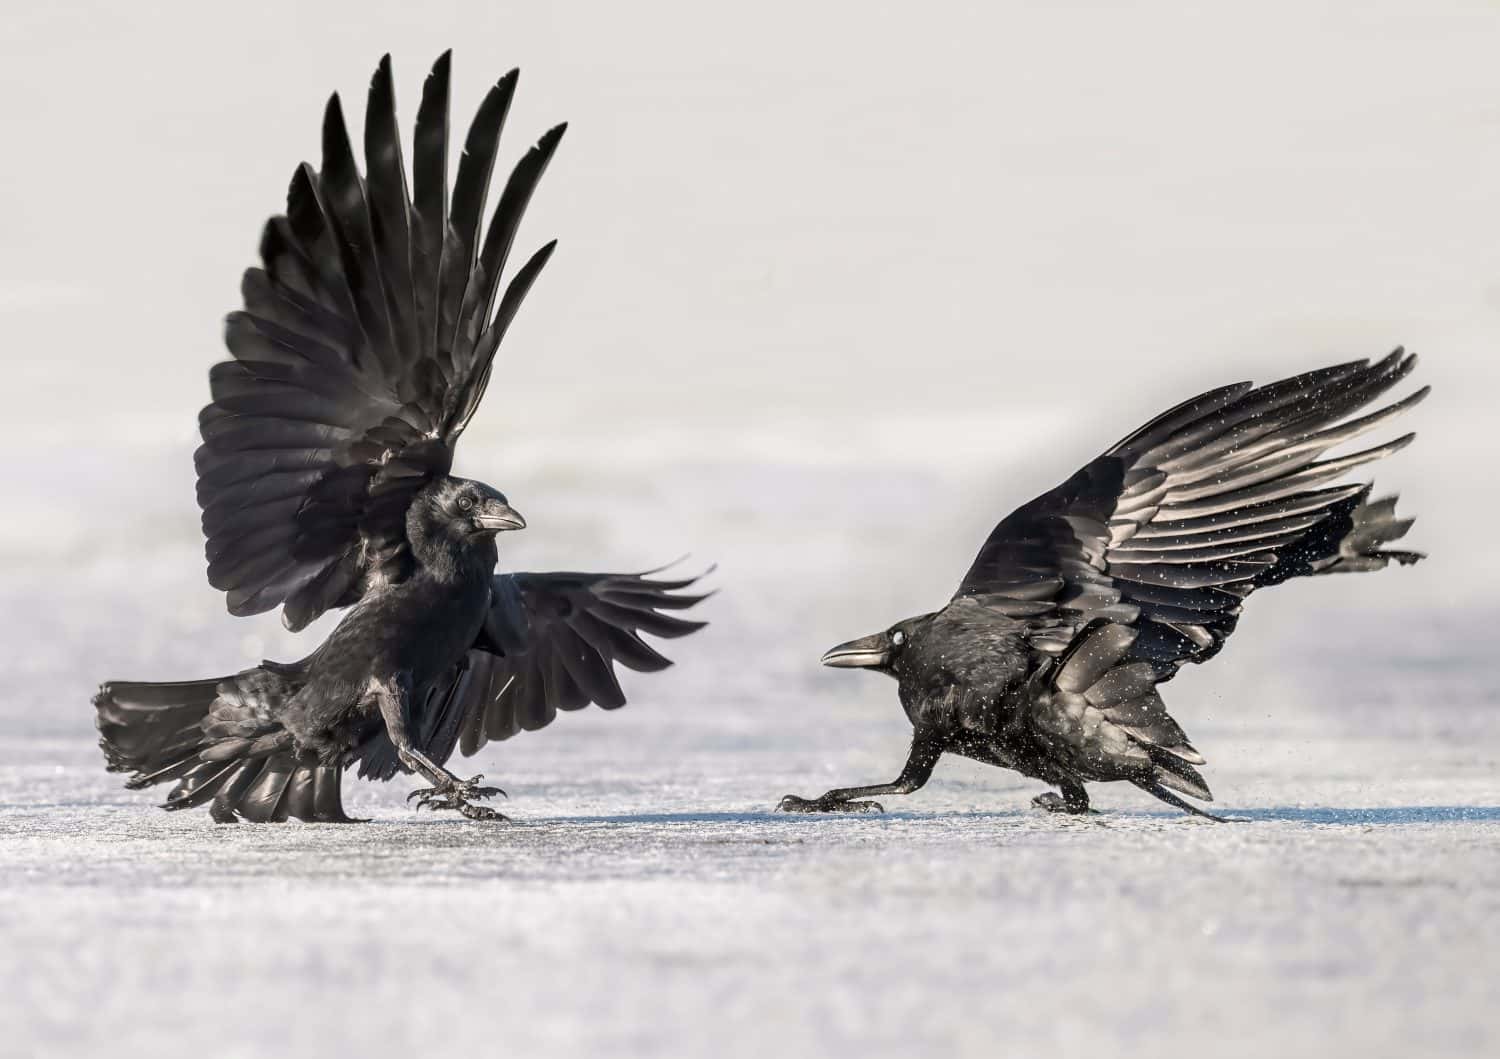 Crows fighting on the ice, close up, in Scotland in the winter